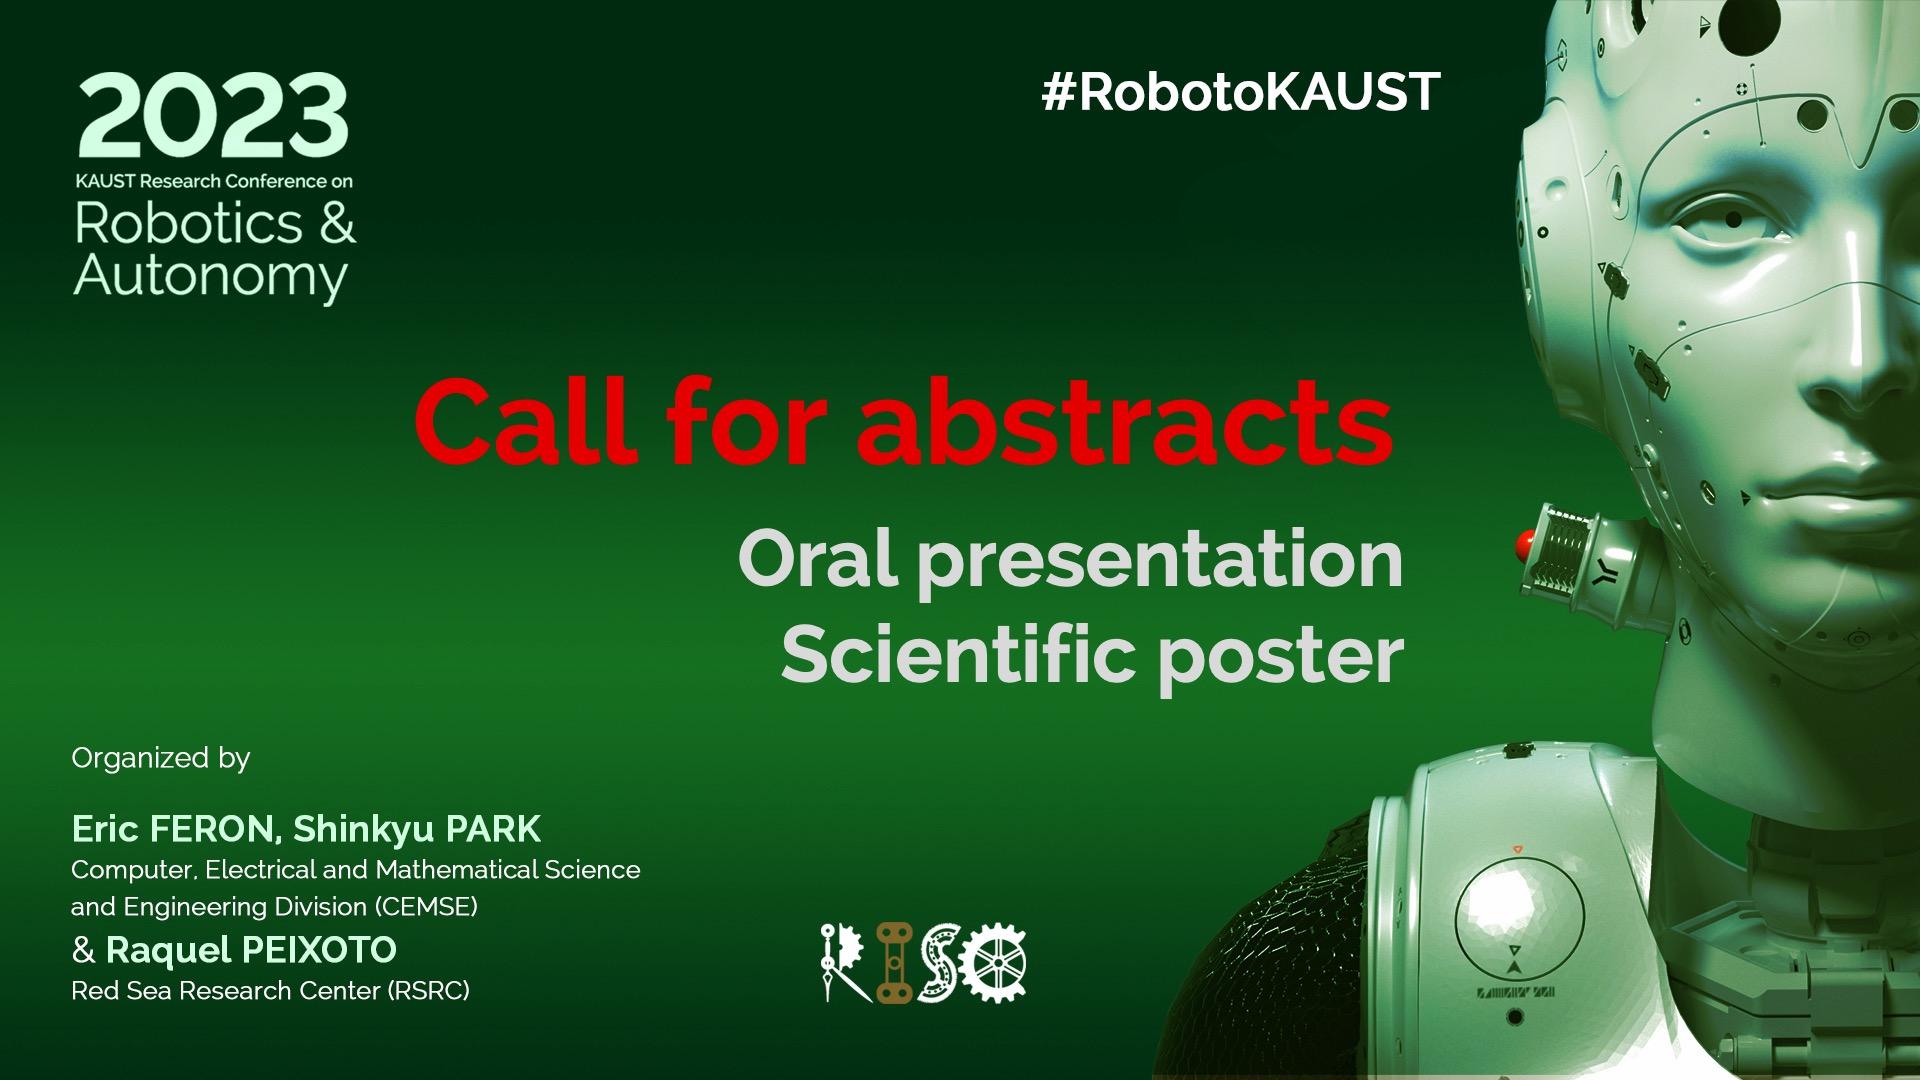 RobotoKAUST 2023 Call for Abstracts 01